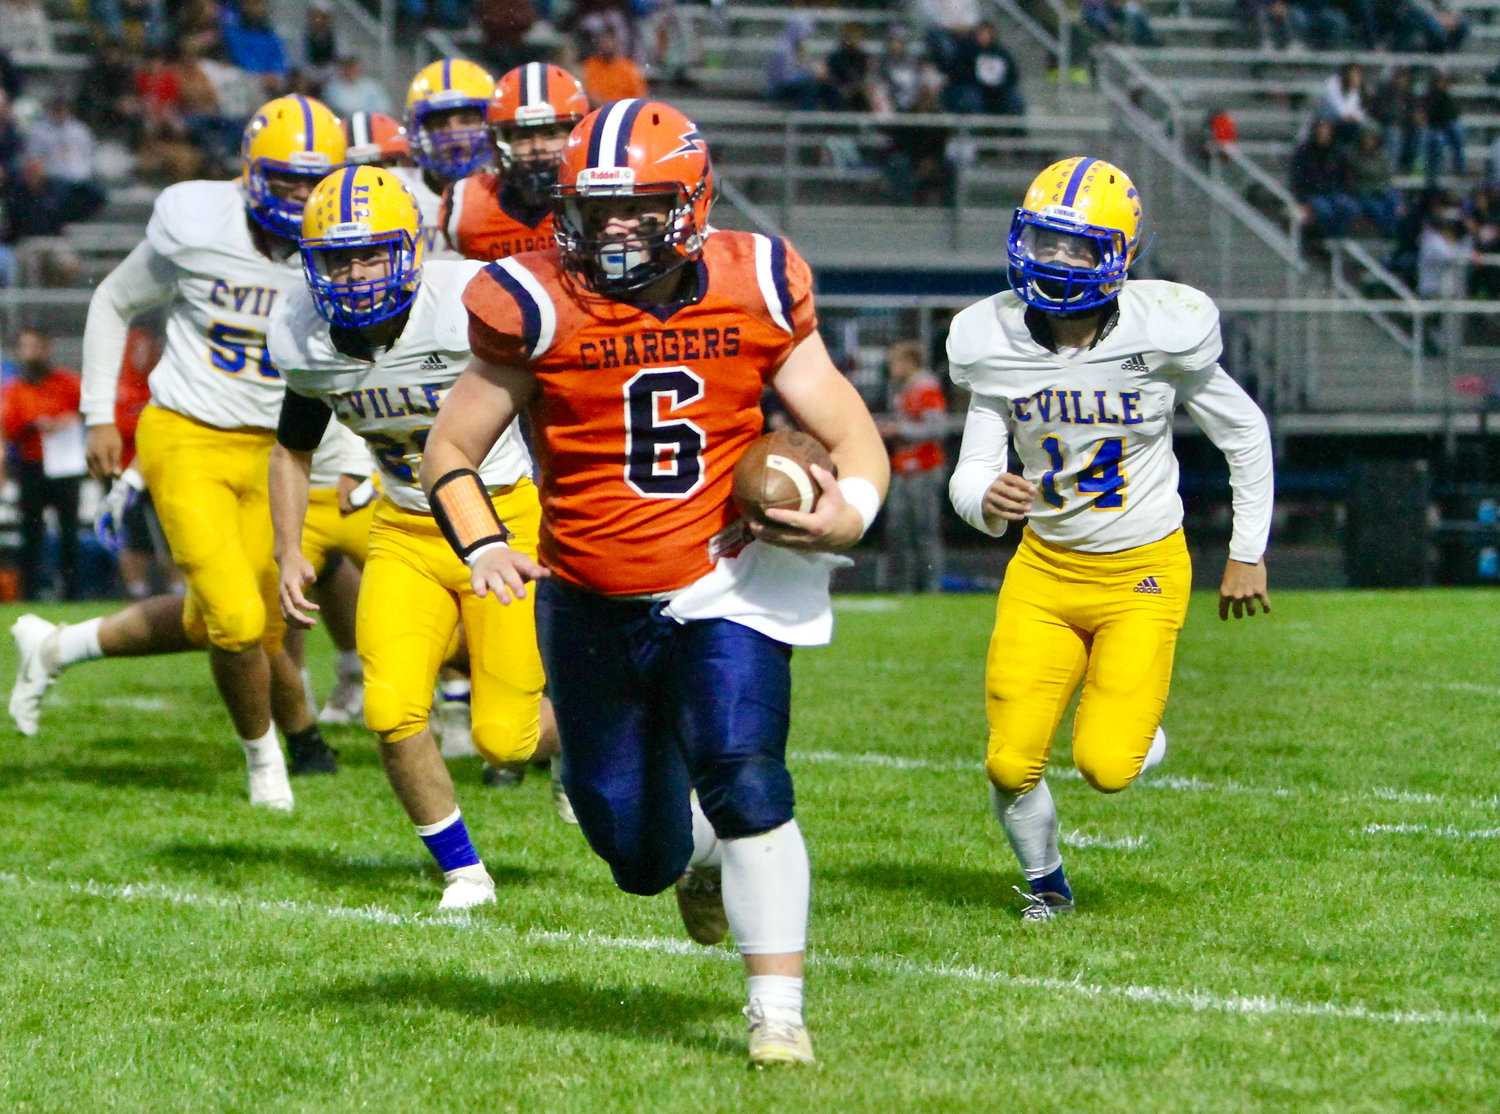 Charger junior quarterback Ross Dyson tallied 200 total yards in North Montgomery’s dominating 44-7 win over Crawfordsville on Friday.